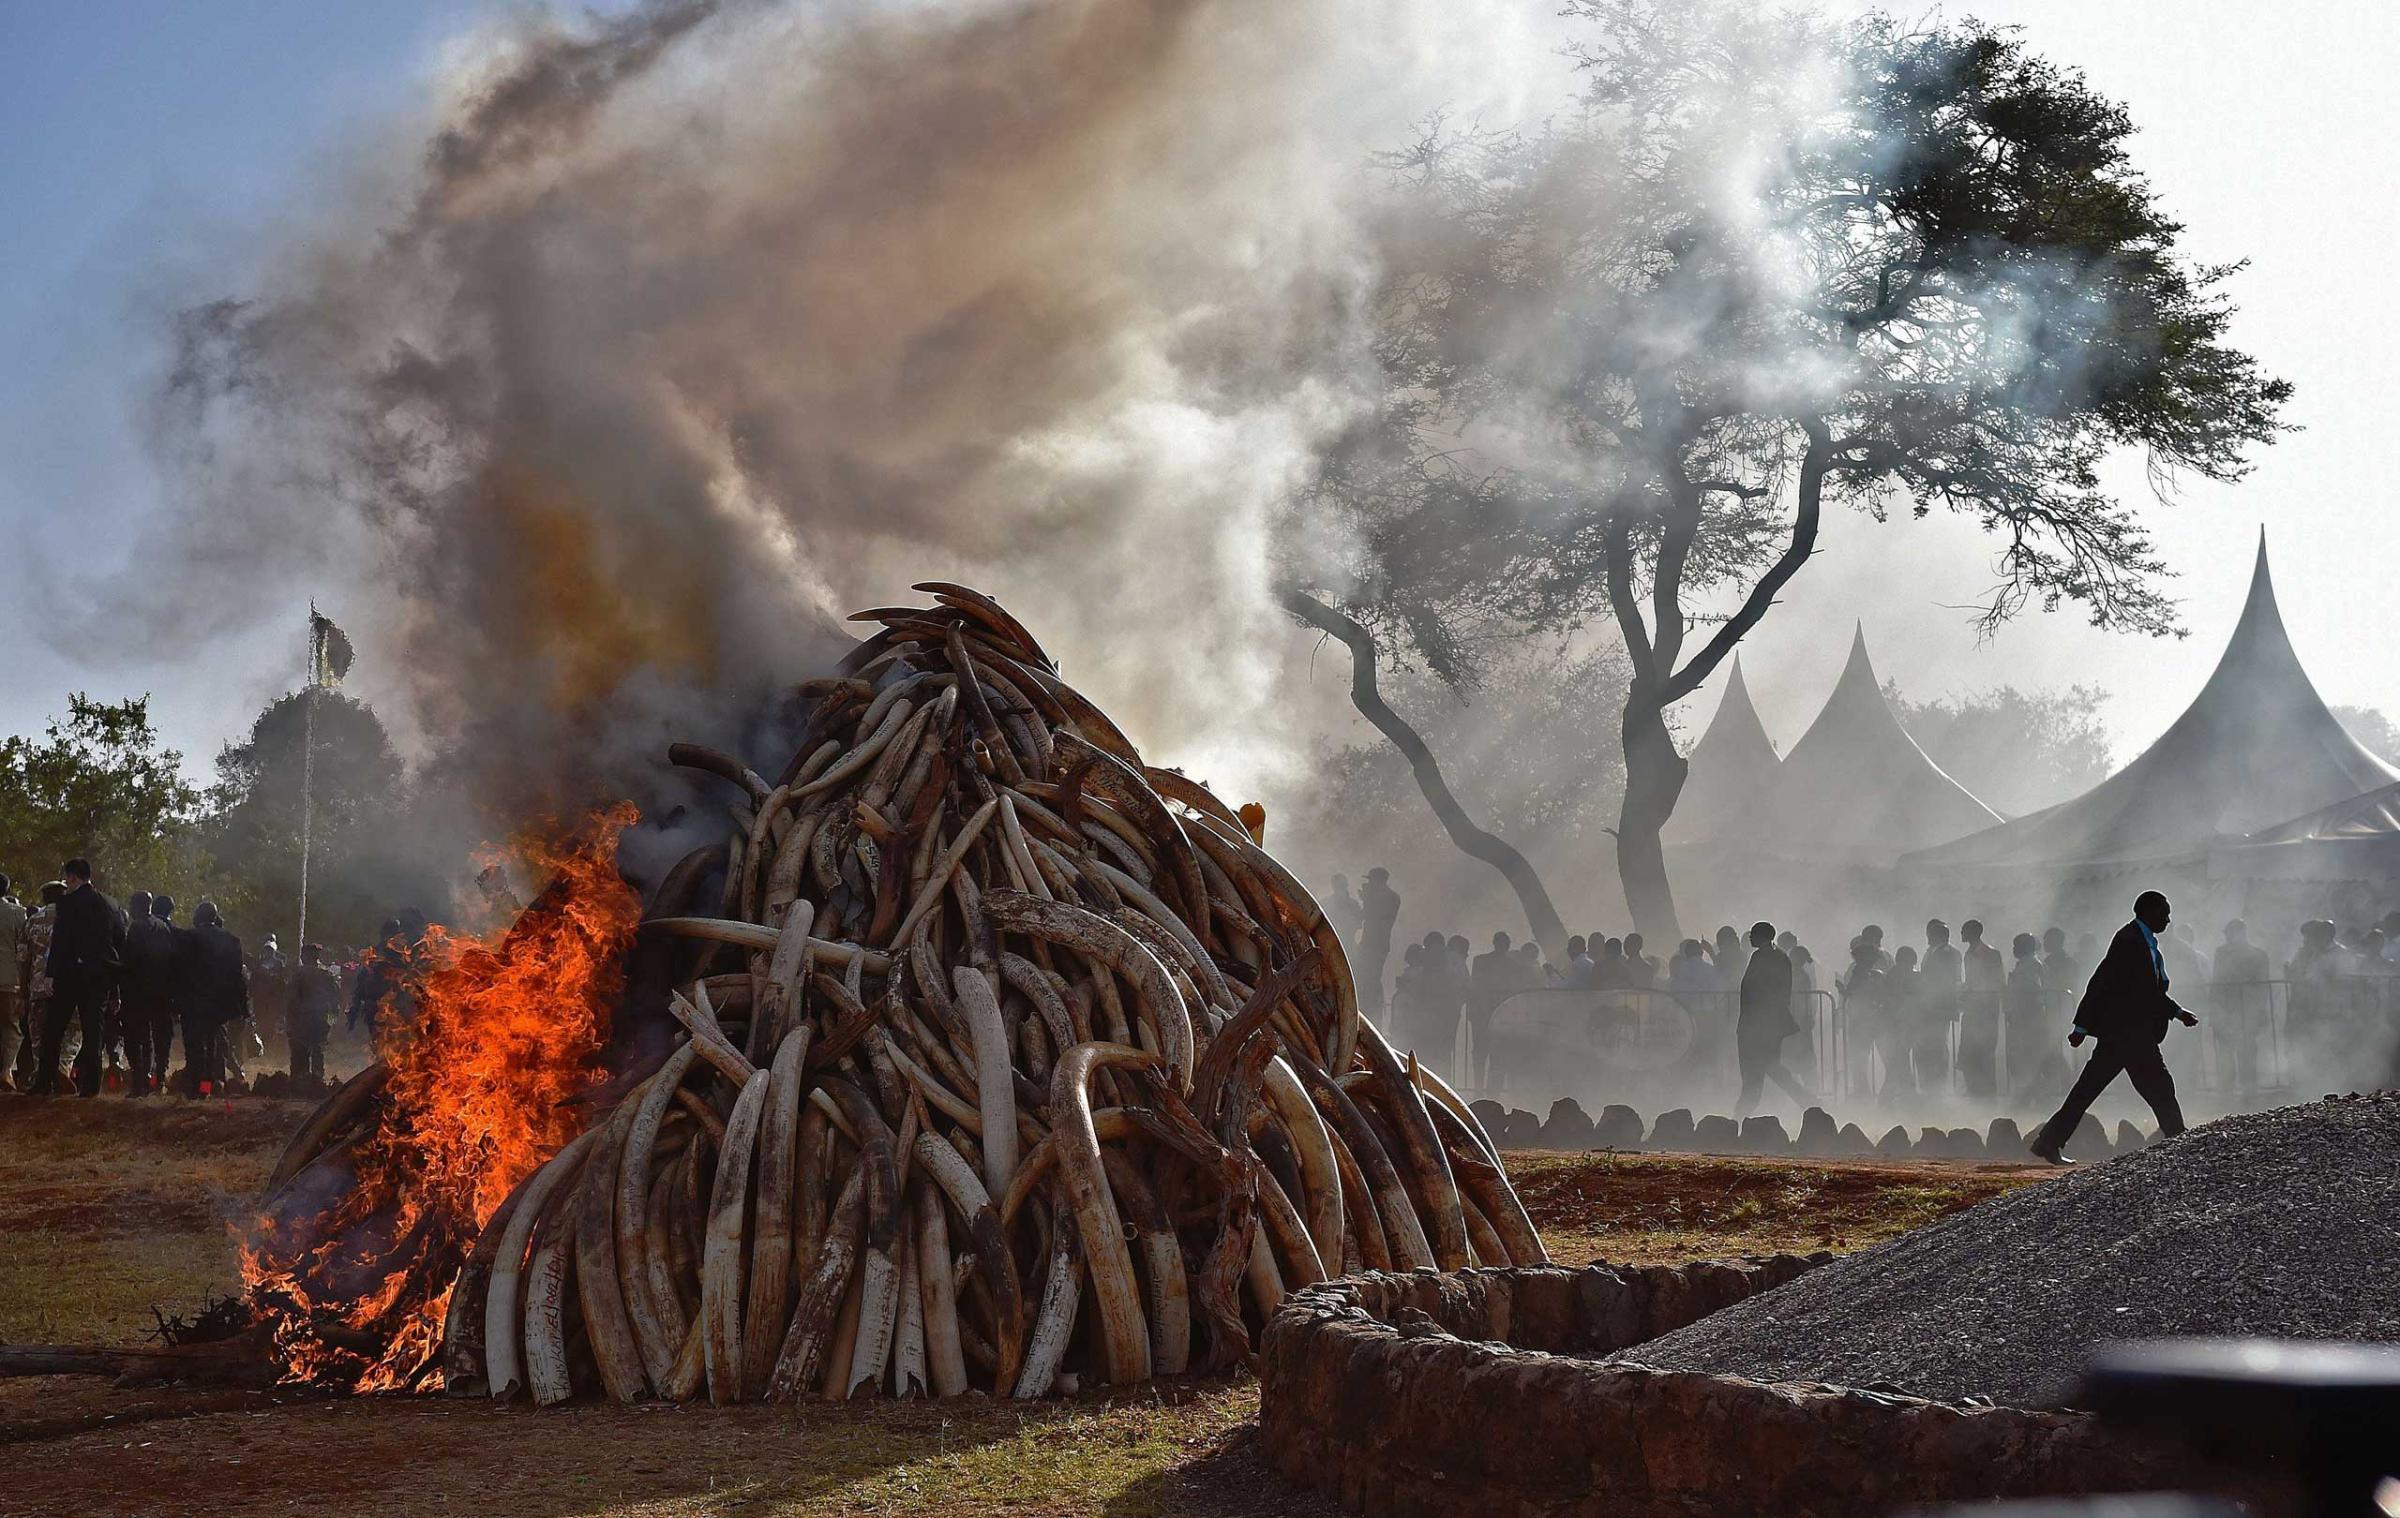 People stand near a burning pile of 15 tons of elephant ivory seized in Nairobi National Park, Nairobi, Kenya. Kenyan President Uhuru Kenyatta set fire to a giant pile of elephant ivory, vowing to destroy the country's entire stockpile of illegal tusks by the year's end. The 15 tonnes destroyed was worth some $30 million (over 26 million euros) on the black market and represented up to 1,500 slaughtered elephants. It dwarfs the ivory burned by previous Kenyan leaders. March 3, 2015